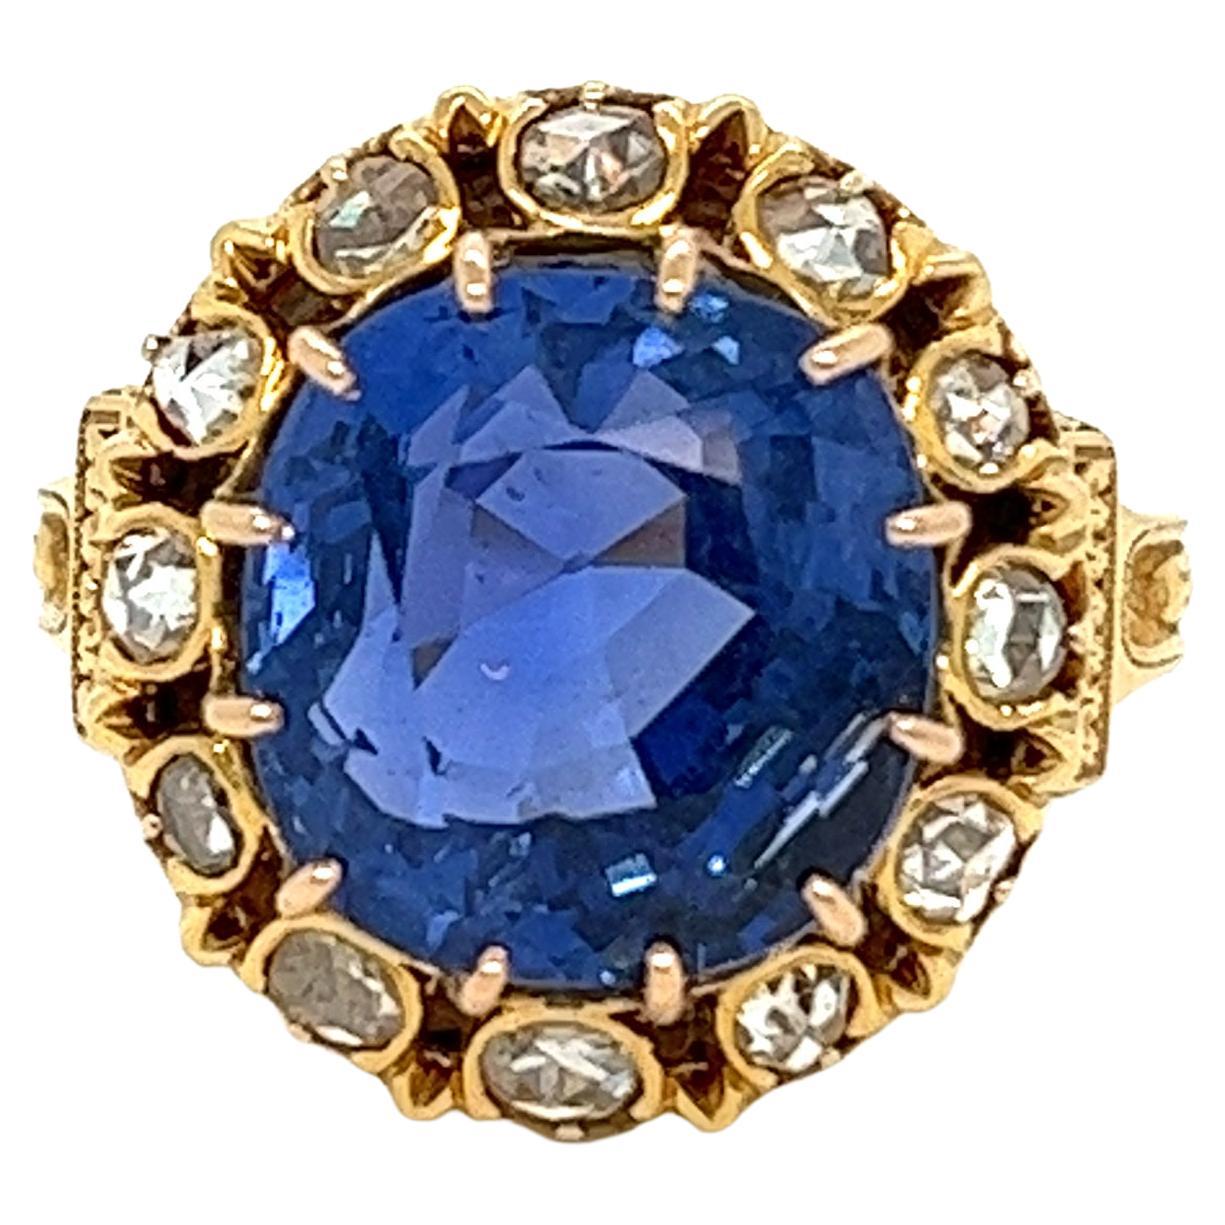 Victorian 10.74 ct. Burma Sapphire Ring SSEF Certified 18kt YG For Sale